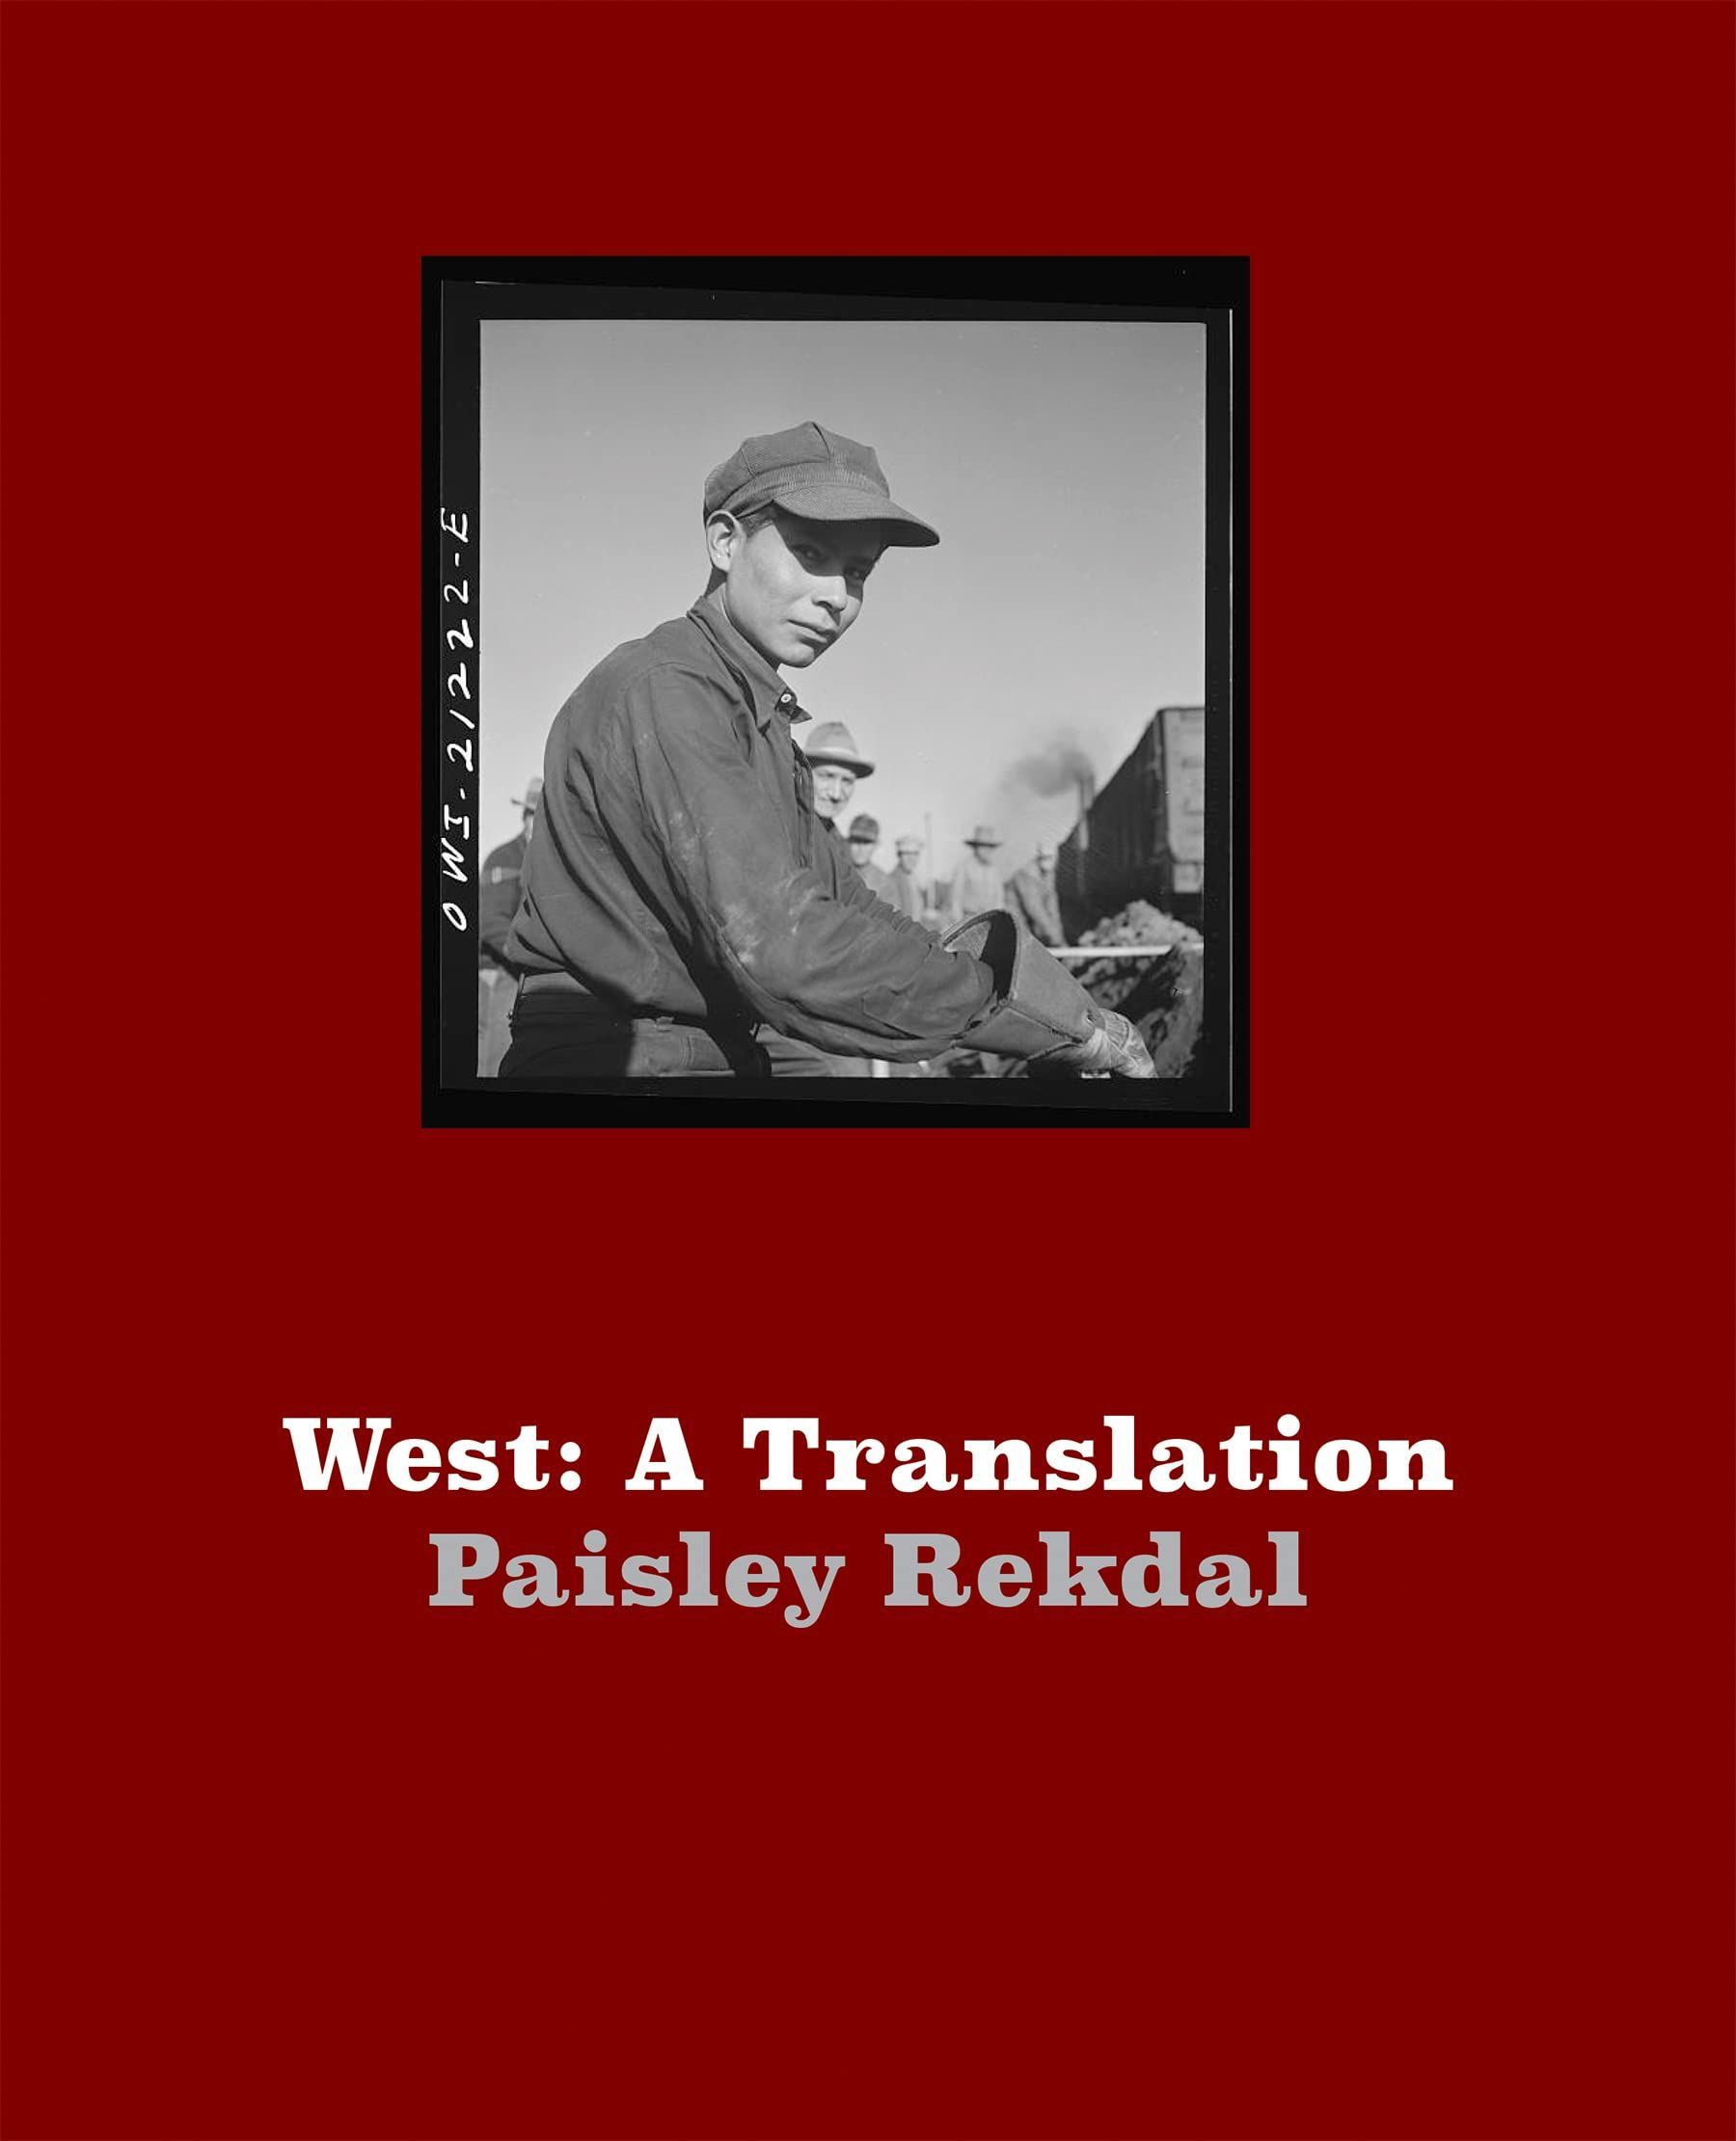 A Carefully Cultivated Loss: On Paisley Rekdal’s “West”